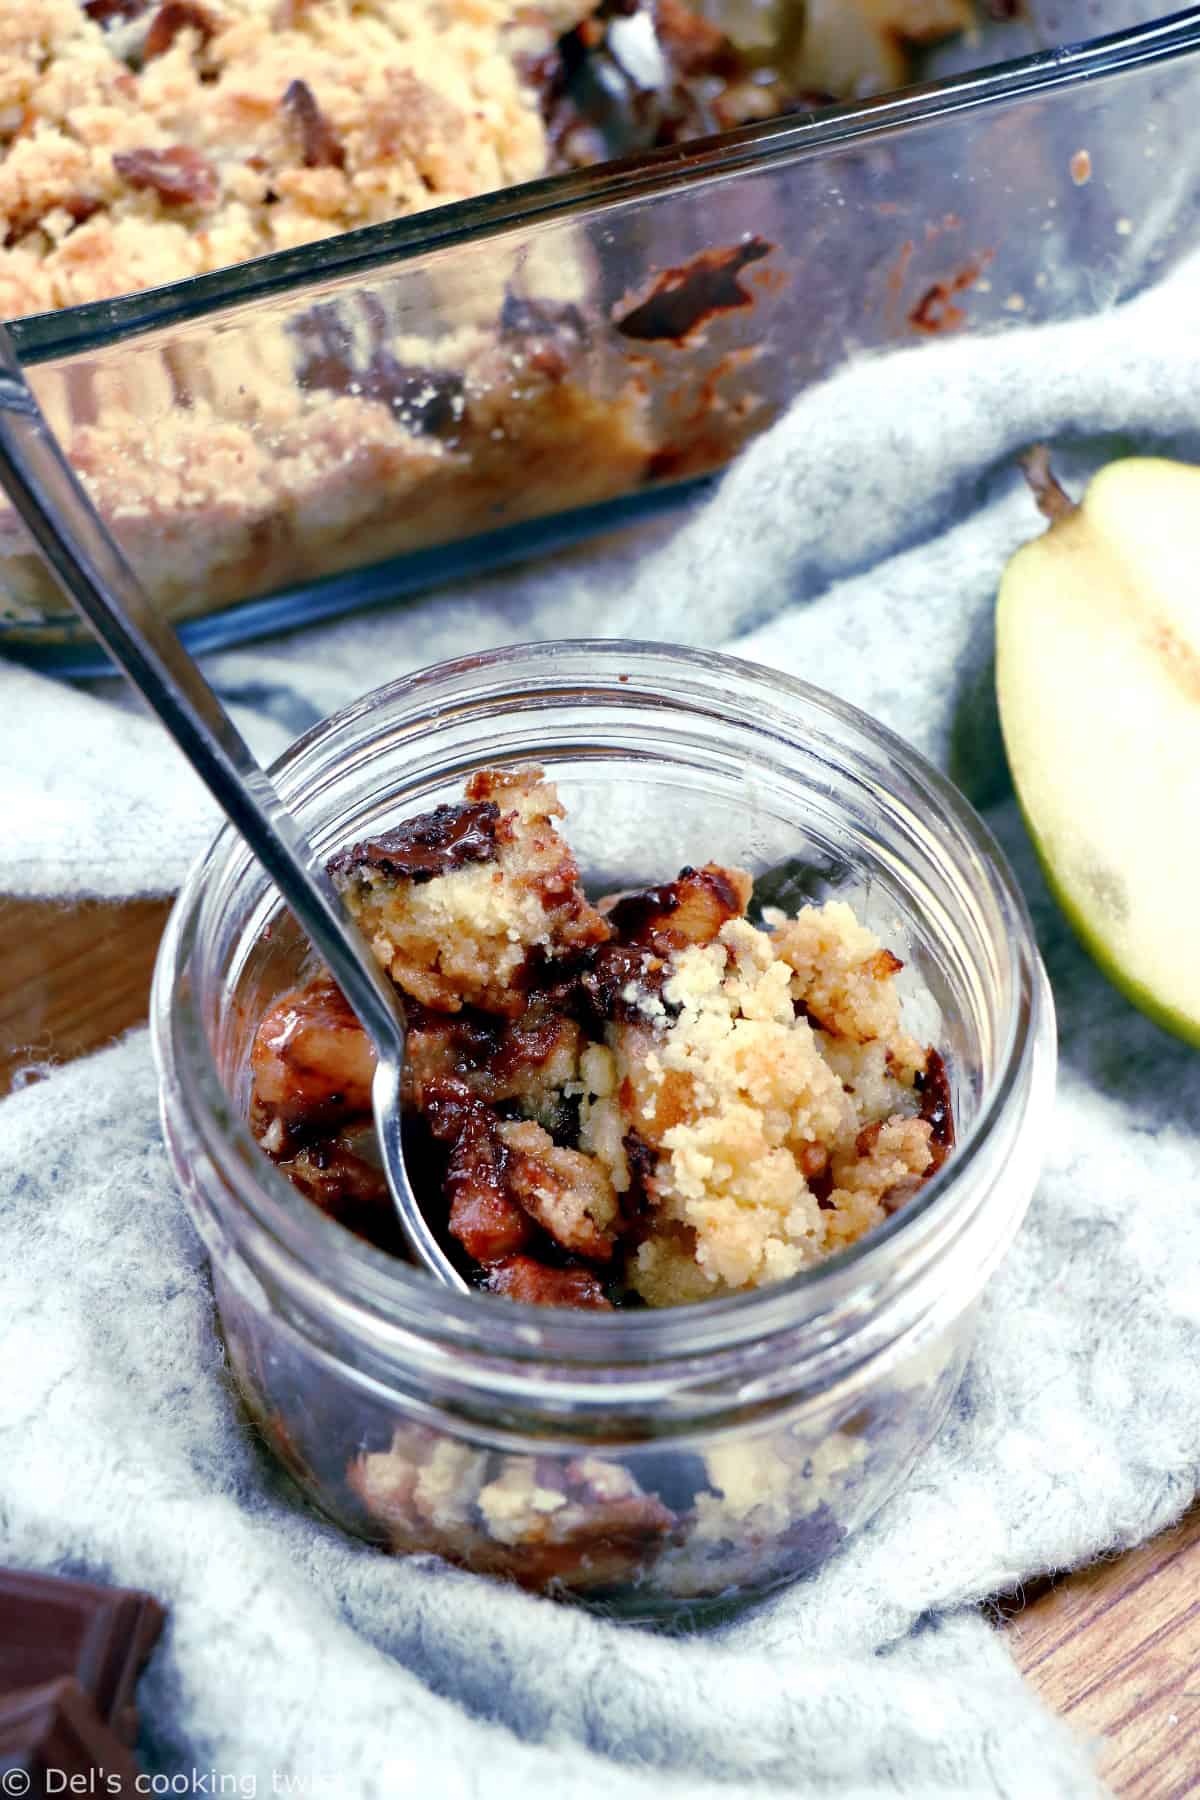 This quick pear and chocolate crumble counts among my all-time favorite desserts. With just a handful of basic ingredients, the recipe comes together beautifully every single time.